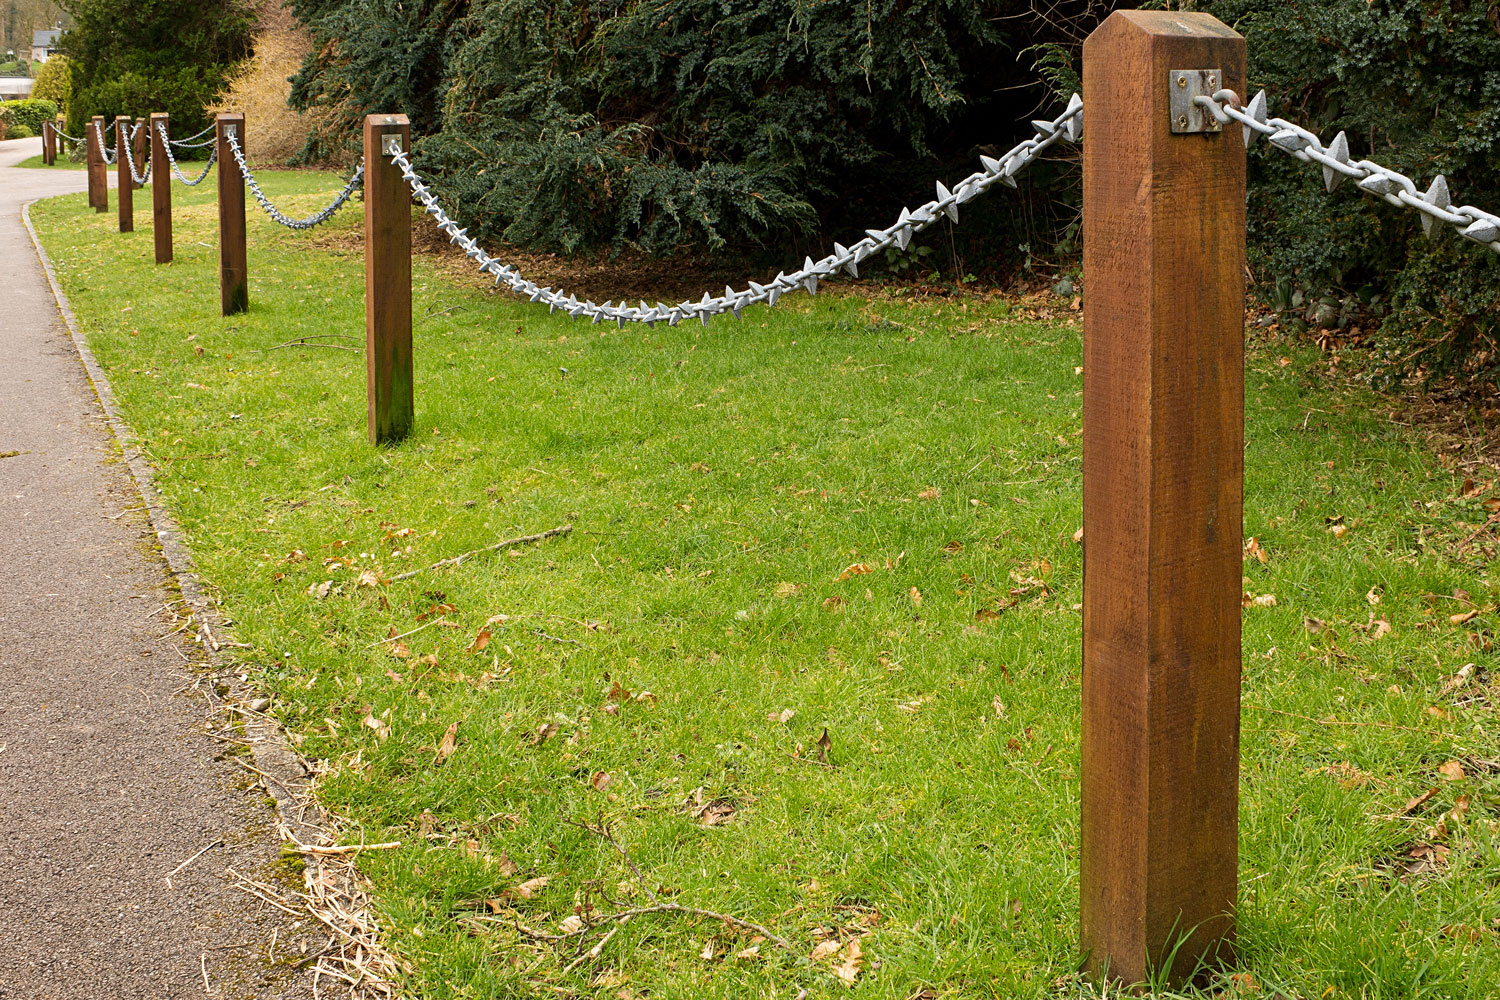 Huge fence posts with sharp chains attached to it